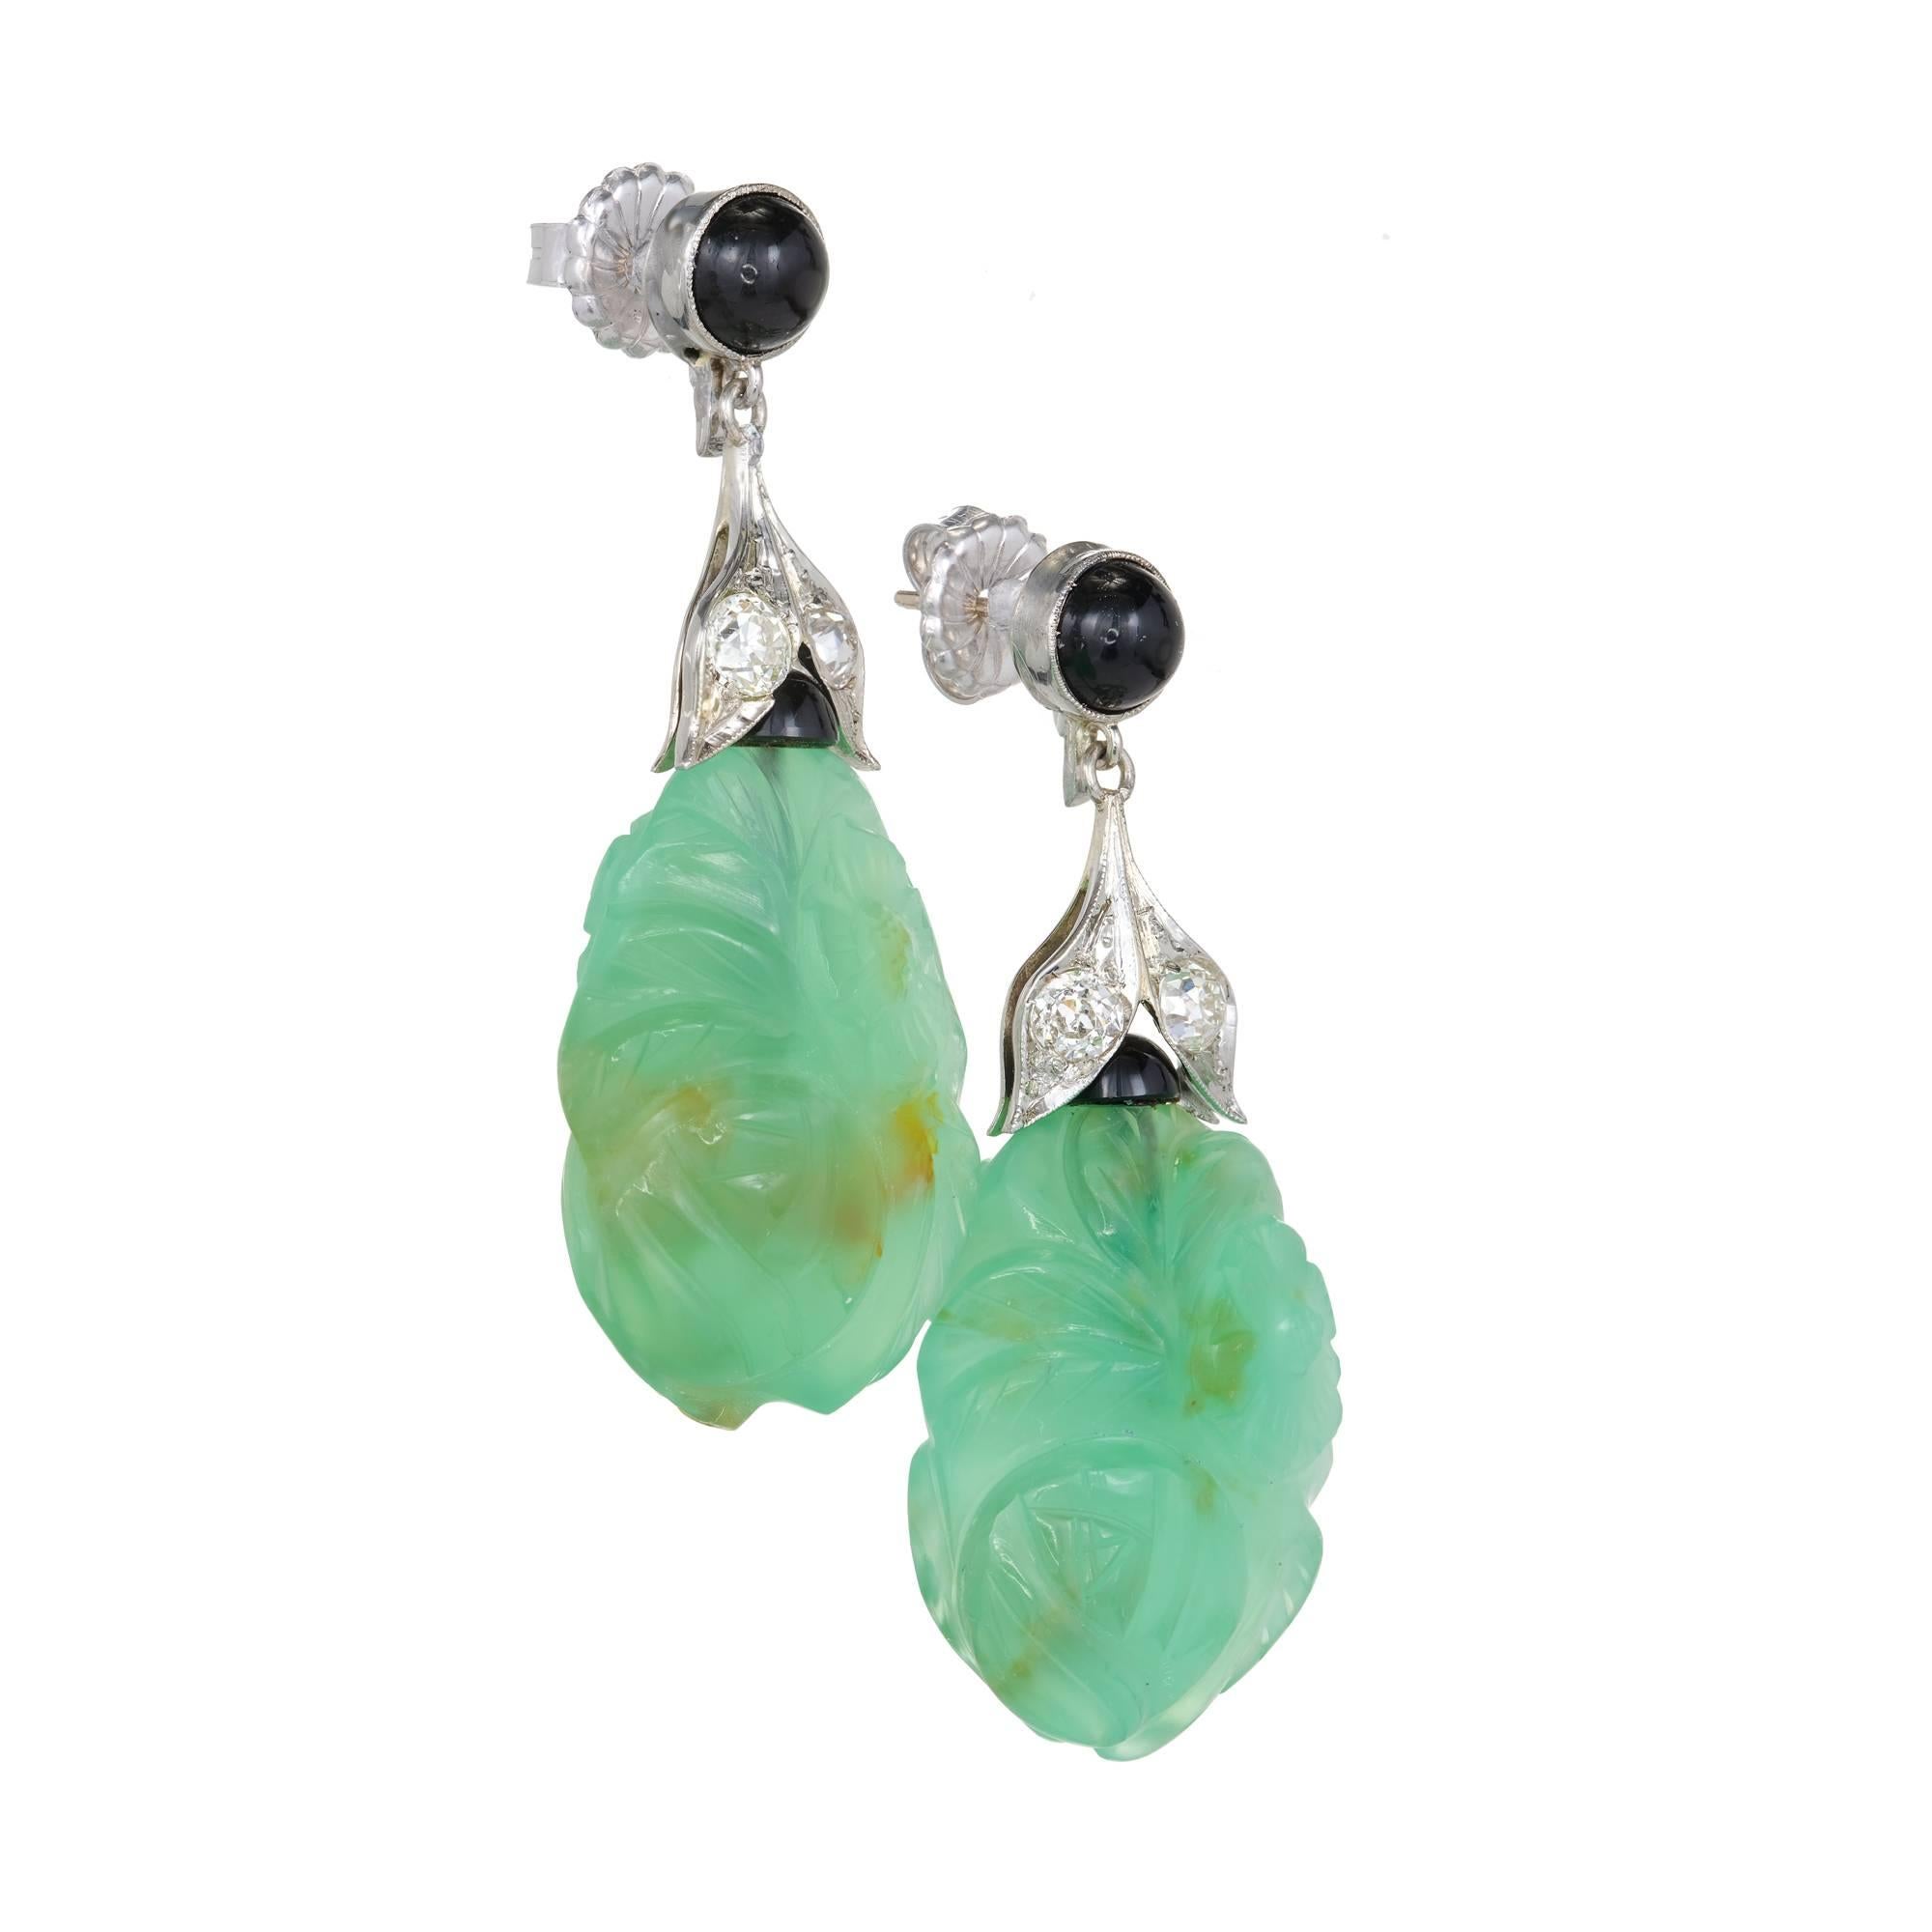 Original 1930’s late Art Deco earrings with translucent carved Chalcedony accented by black Onyx and old European cut Diamonds.

2 carved green Chalcedony, 24.7 x 18.44 x 10mm, GIA certificate #6187474086
2 round cabochon black Onyx, 5.63mm
2 round